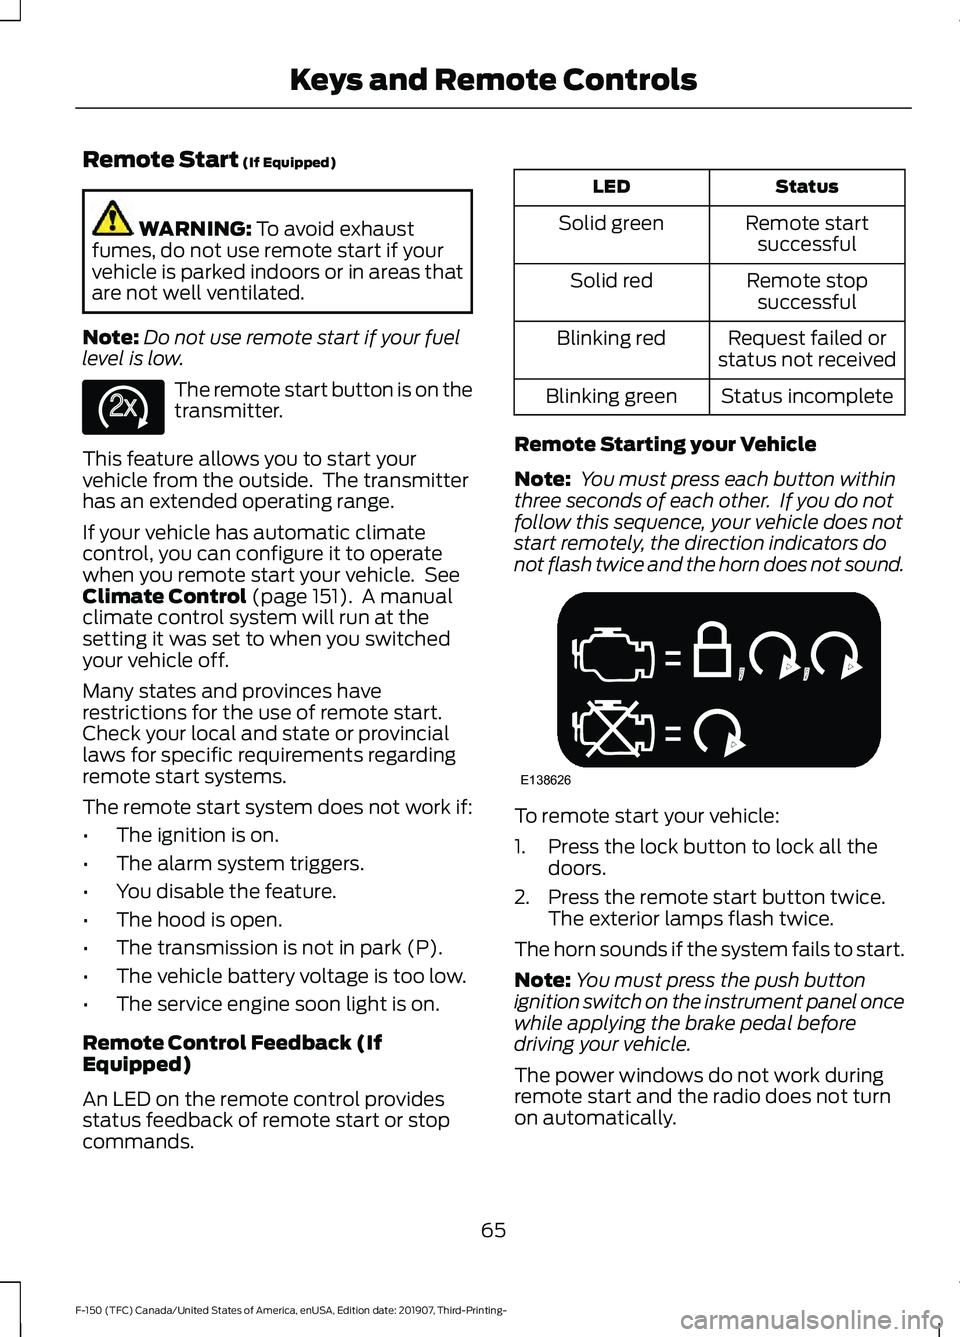 FORD F-150 2020  Owners Manual Remote Start (If Equipped)
WARNING: 
To avoid exhaust
fumes, do not use remote start if your
vehicle is parked indoors or in areas that
are not well ventilated.
Note: Do not use remote start if your f